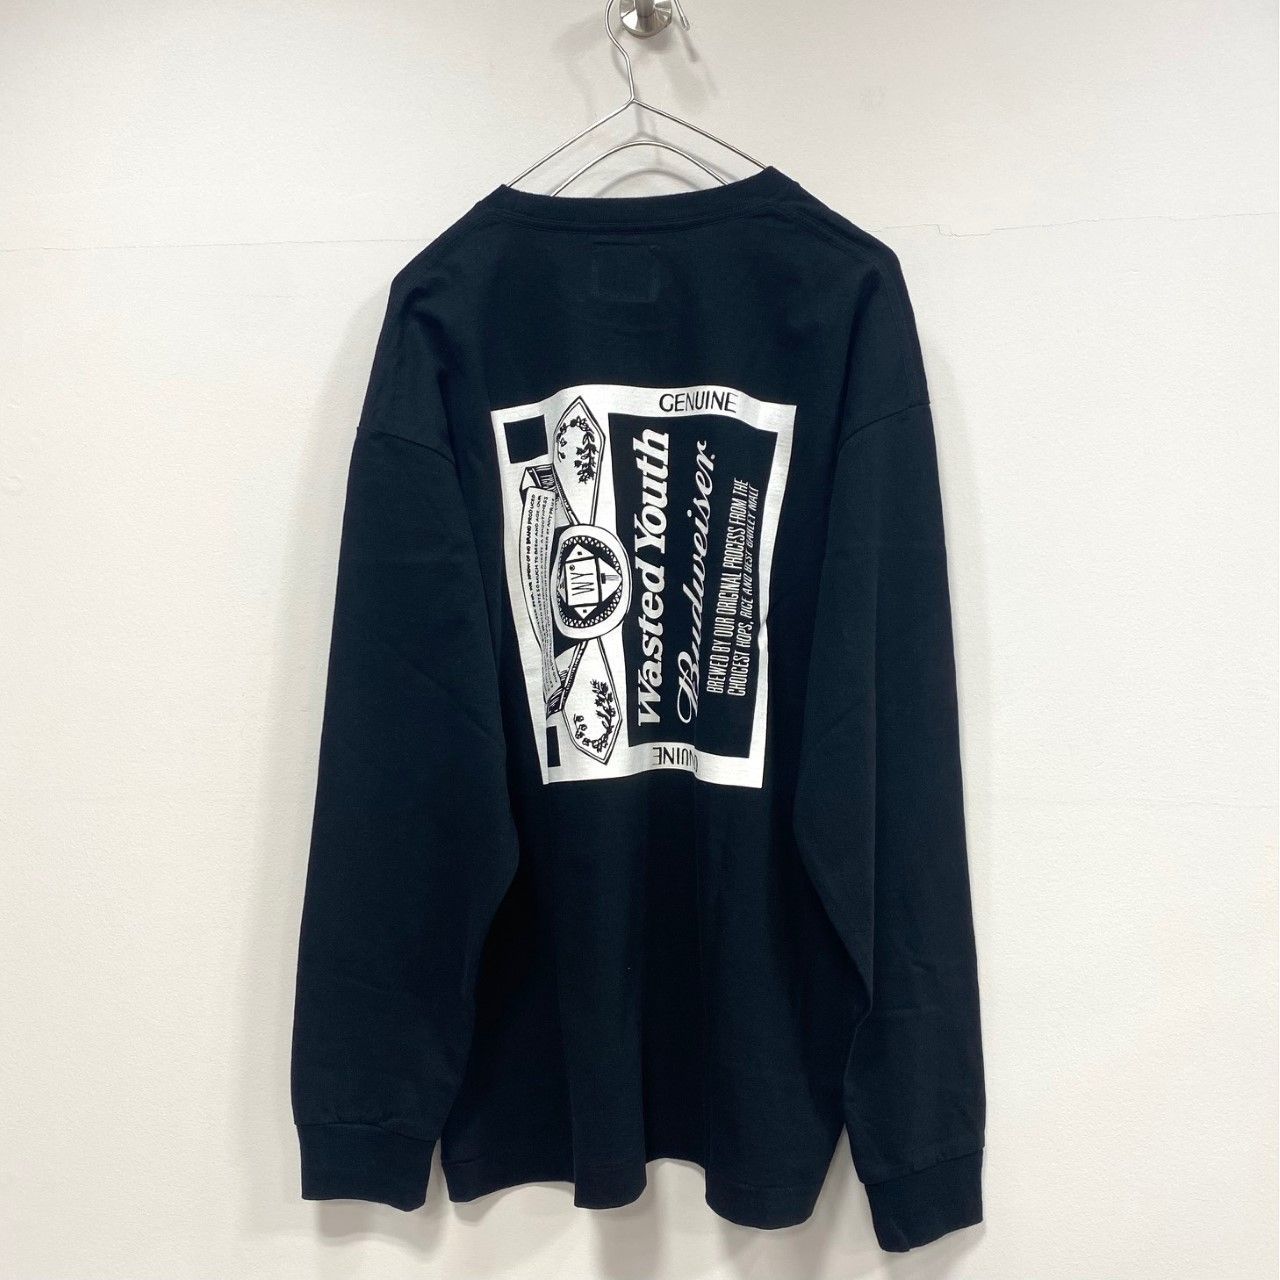 L/S T-SHIRT  Wasted Youth Budweiser L